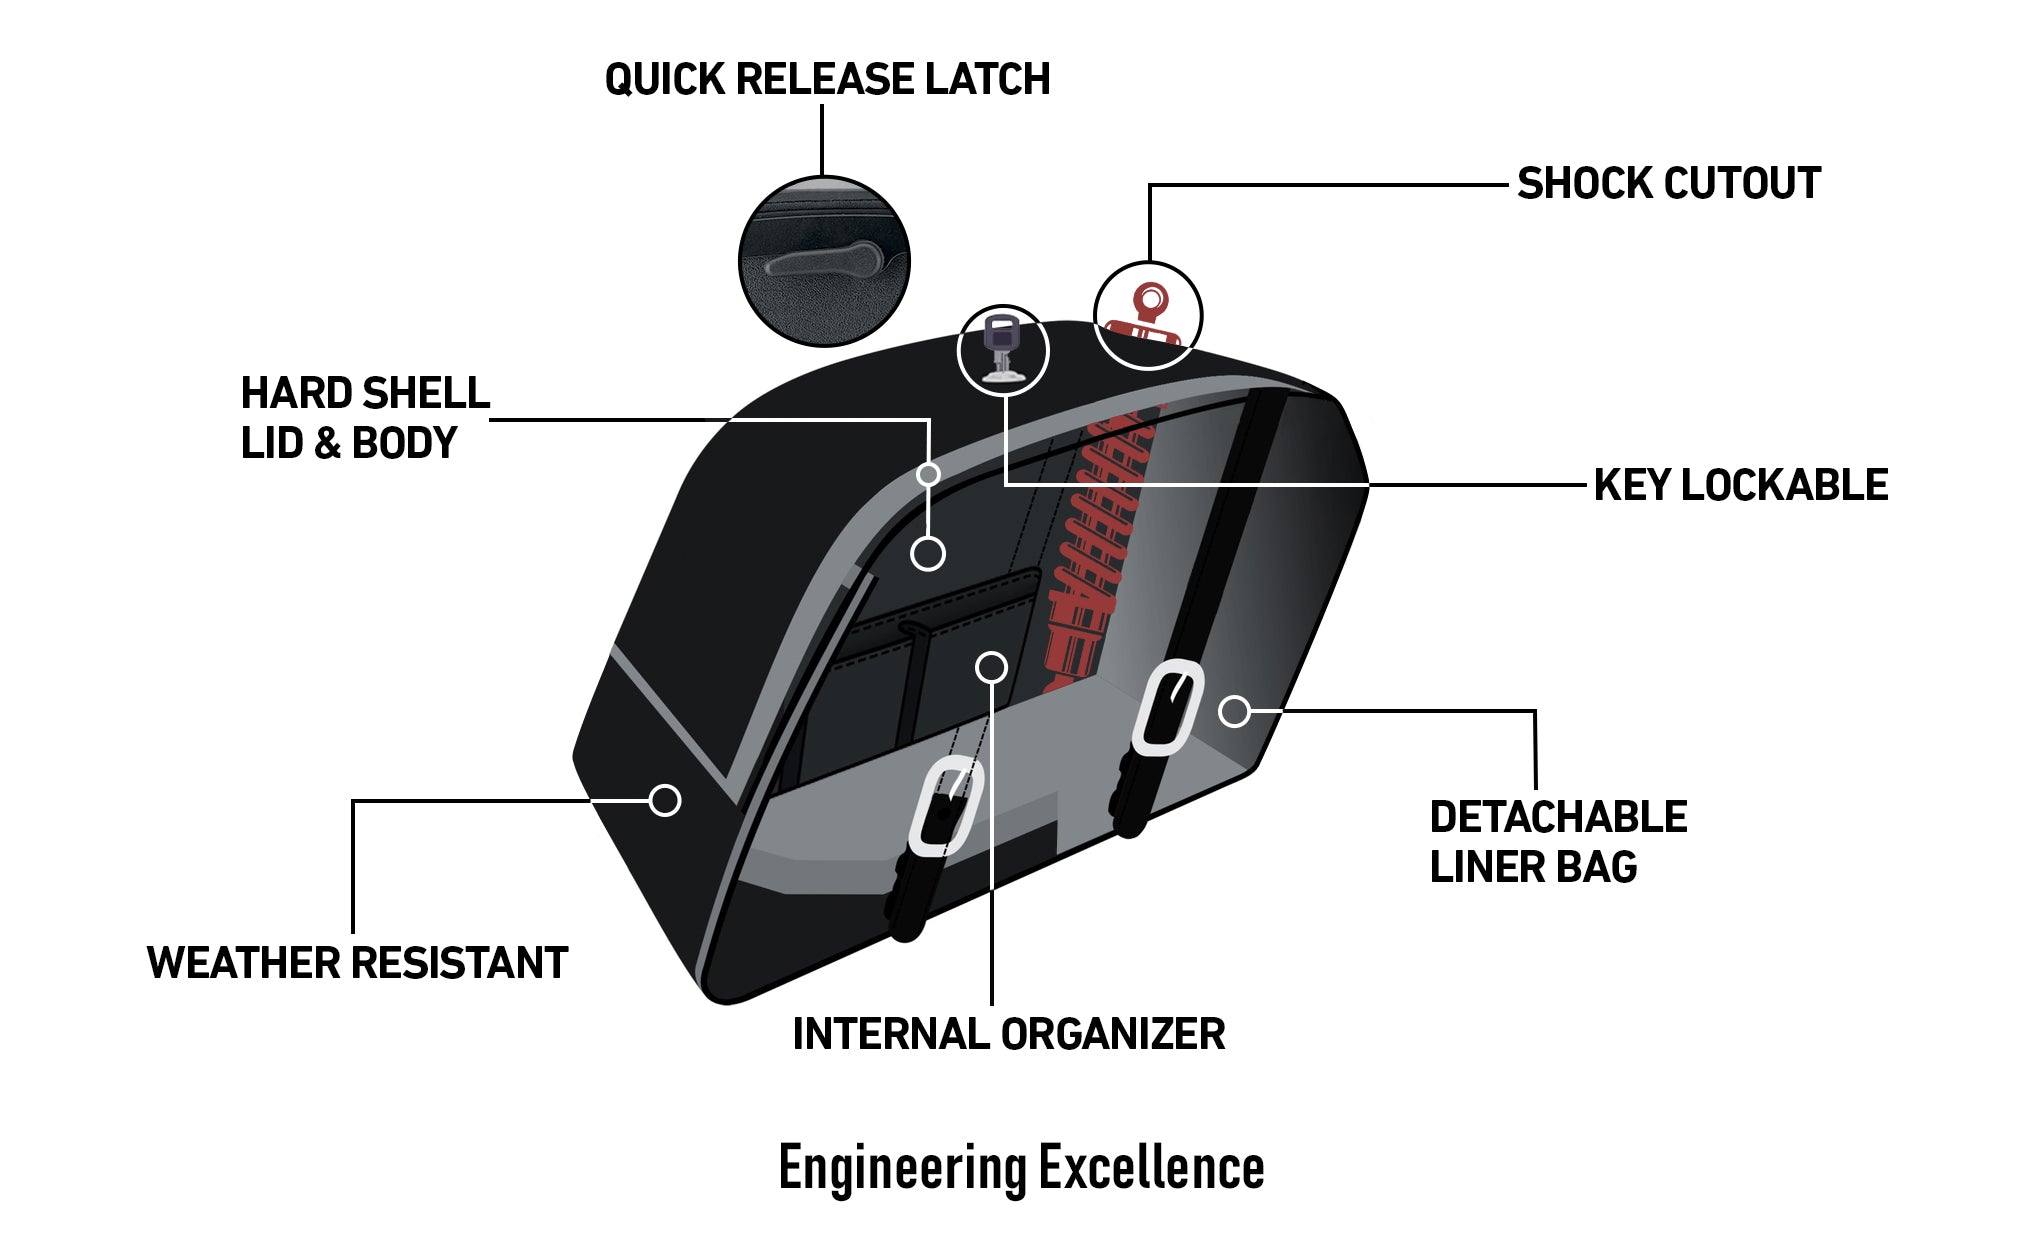 Viking Baldur Extra Large Shock Cut Out Painted Motorcycle Hard Saddlebags For Harley Dyna Switchback Fld Engineering Excellence with Bag on Bike @expand